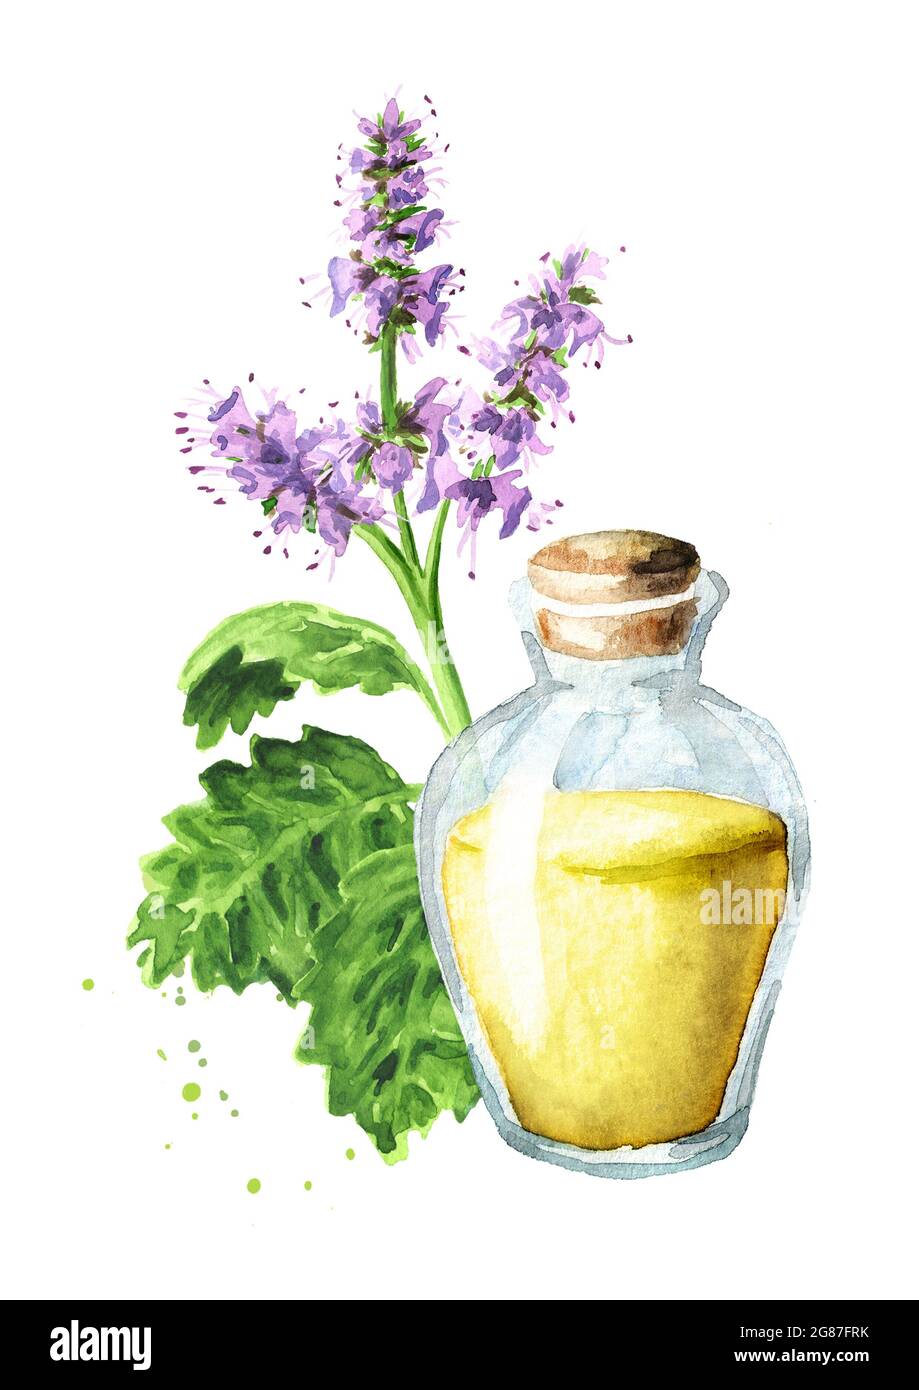 Patchouli or Pogostemon cablini essential oil Hand drawn watercolor illustration isolated on white background Stock Photo